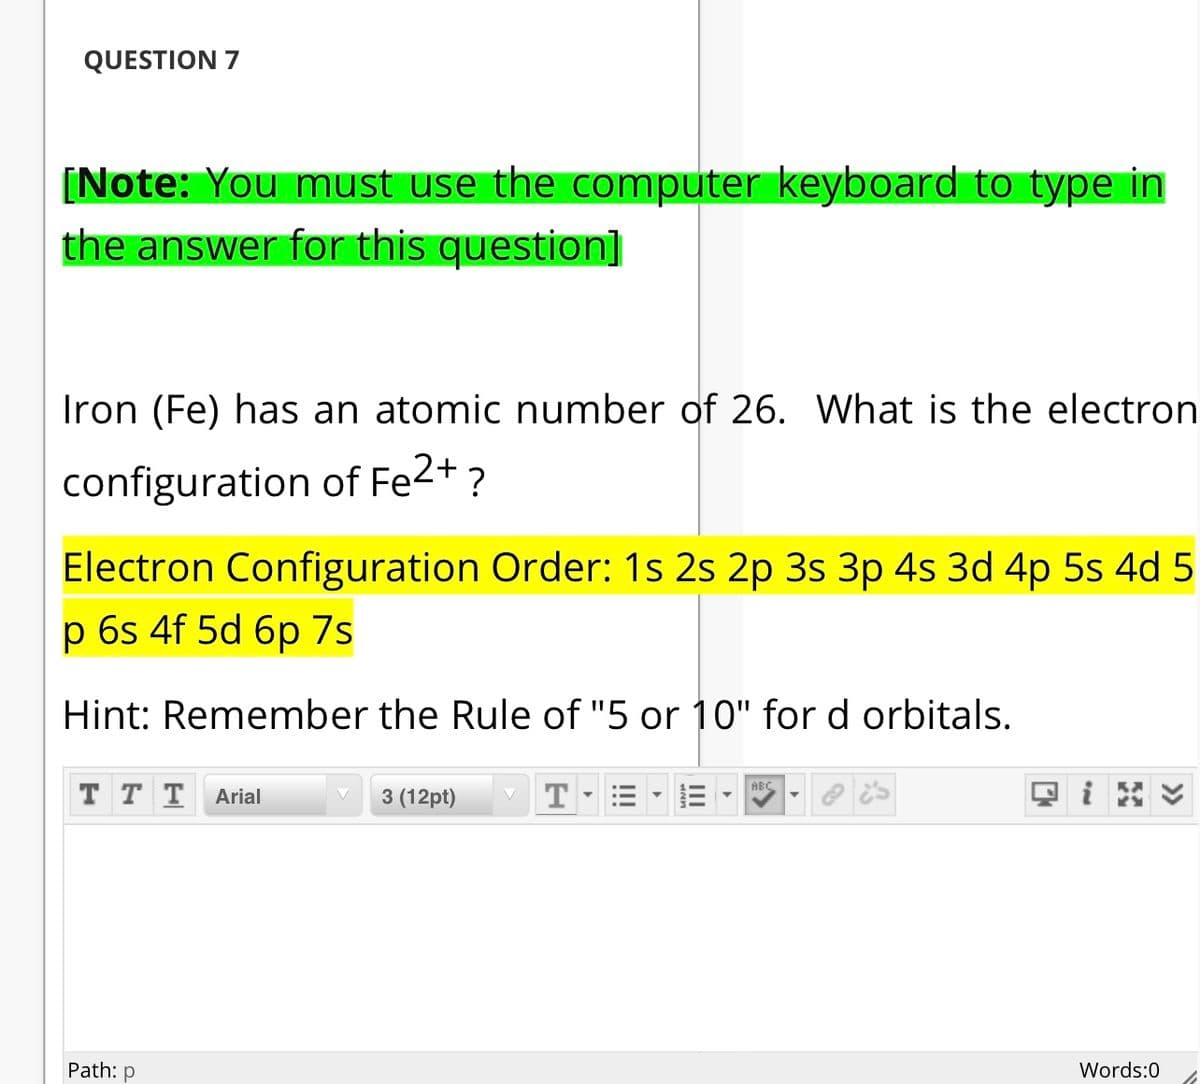 QUESTION 7
[Note: You must use the computer keyboard to type in
the answer for this question]
Iron (Fe) has an atomic number of 26. What is the electron
configuration of Fe2+ ?
Electron Configuration Order: 1s 2s 2p 3s 3p 4s 3d 4p 5s 4d 5
p 6s 4f 5d 6p 7s
Hint: Remember the Rule of "5 or 10" for d orbitals.
ABC
ттт
Arial
3 (12pt)
T
Path: p
Words:0
